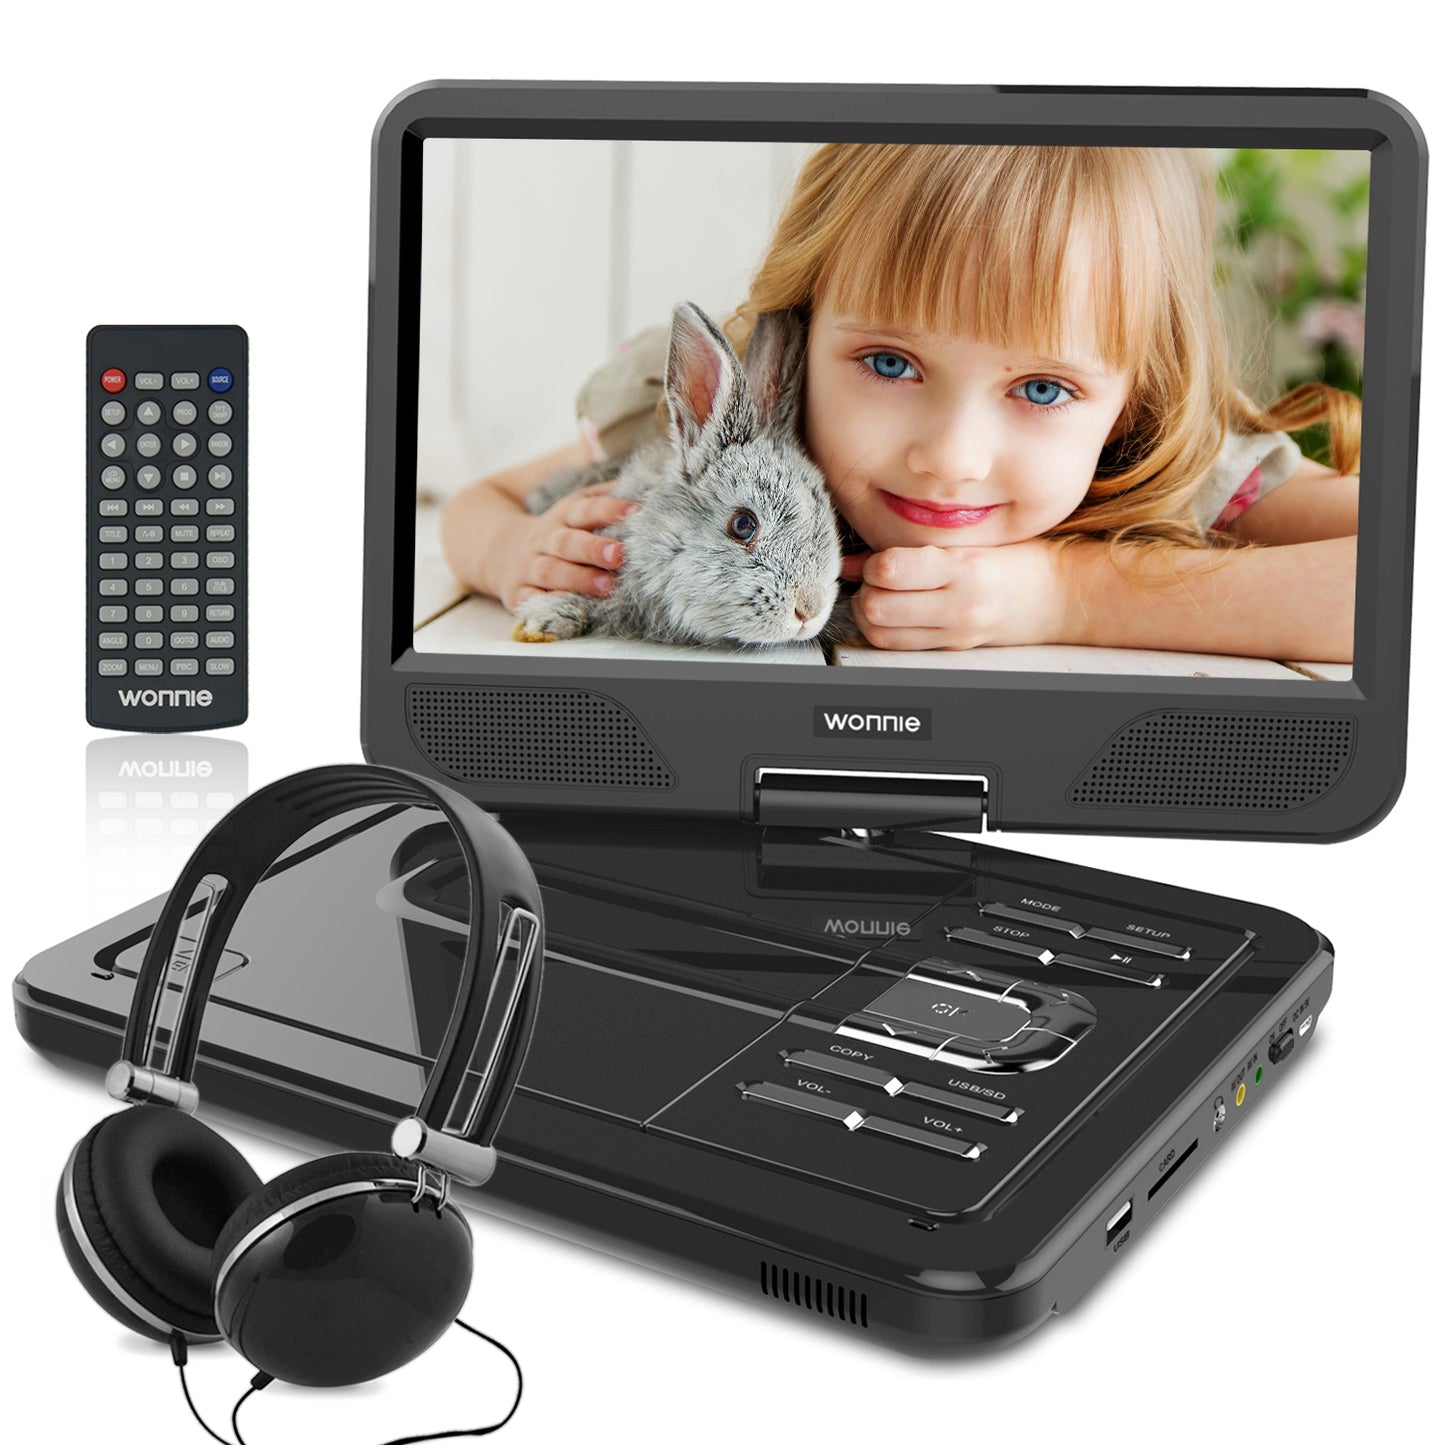 1038 WONNIE 2021 Upgrade 12.5” Portable DVD Player with 10.5 inches 270° Swivel Screen Built-in 6 Hrs Rechargeable Battery SD Card and USB, Direct Play in Formats AVI/MP3/JPEG/RMVB (12.5, Black)